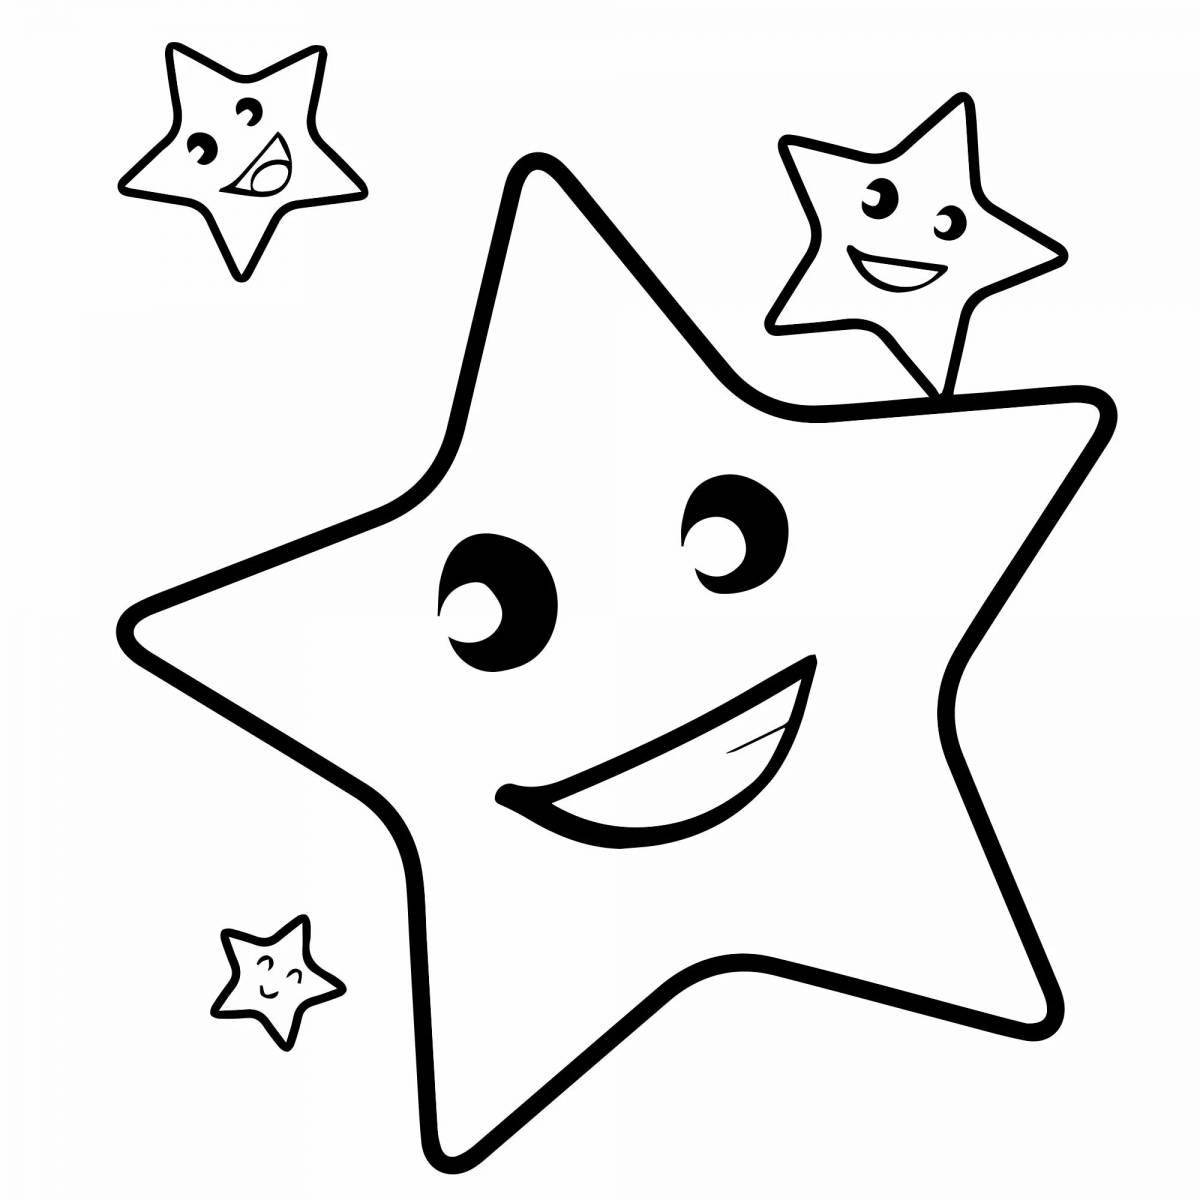 Coloring book shining star for preschoolers